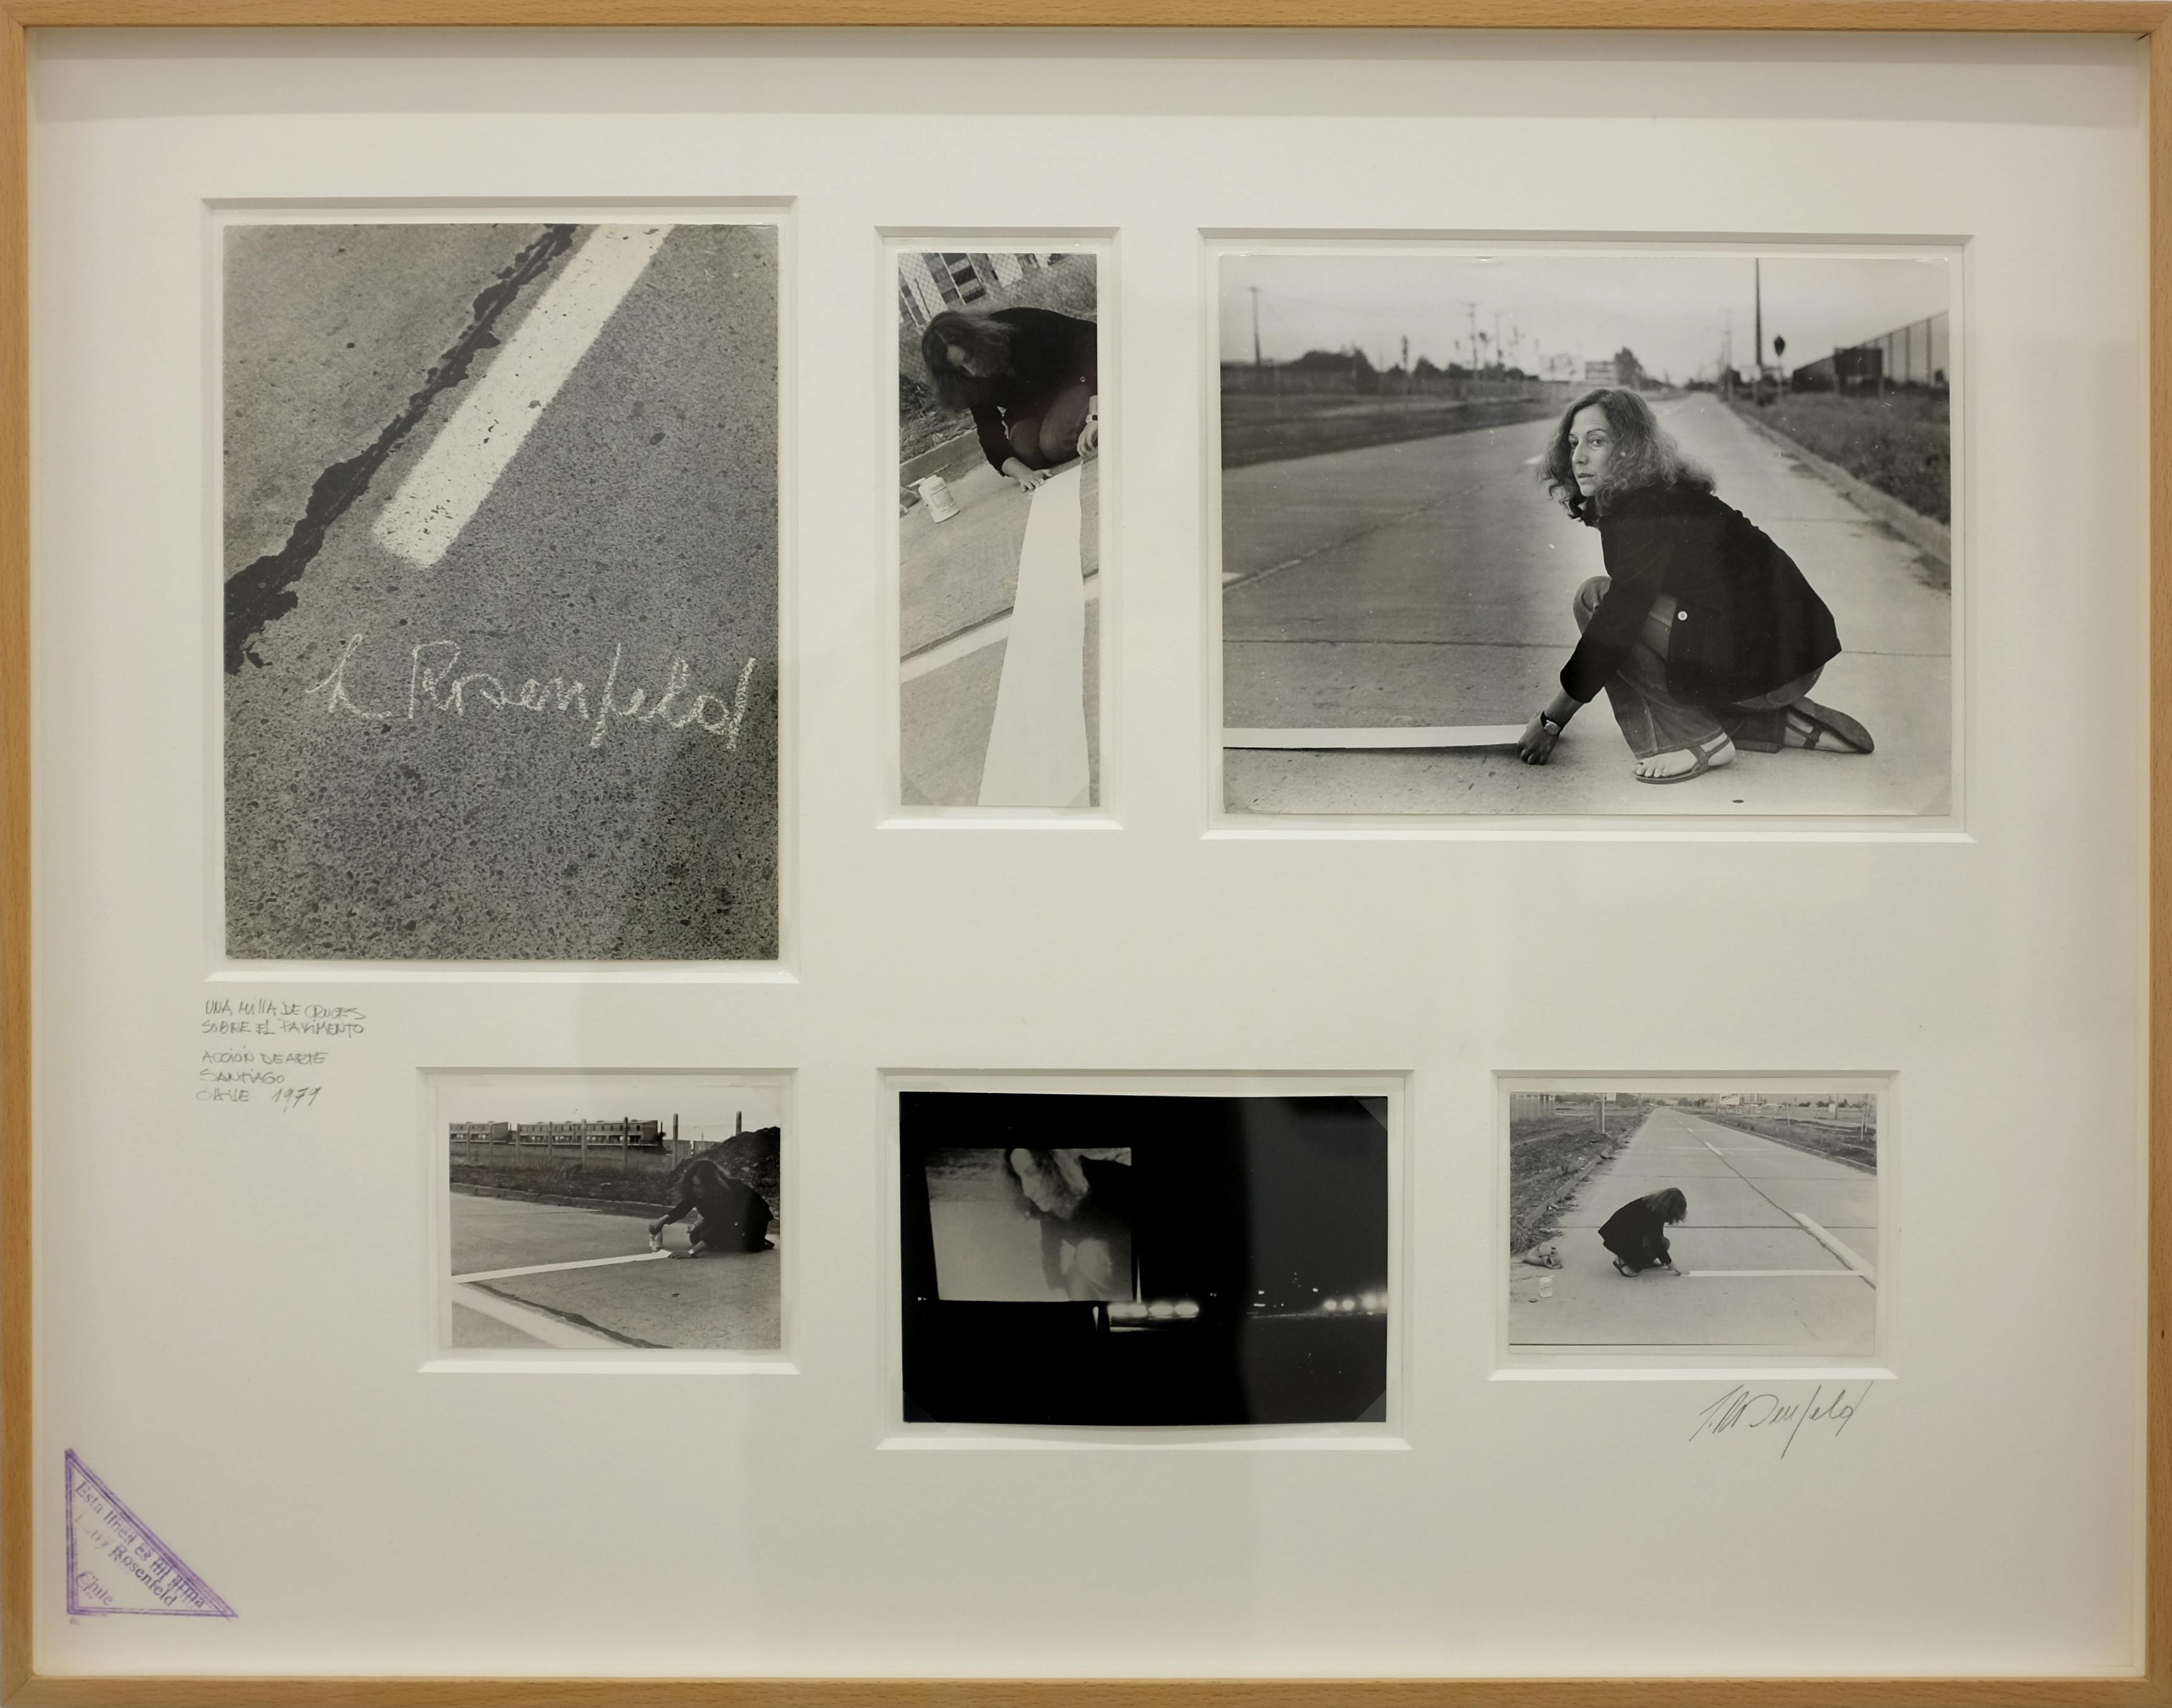 Six black and white images showing a woman painting a white line on a street.